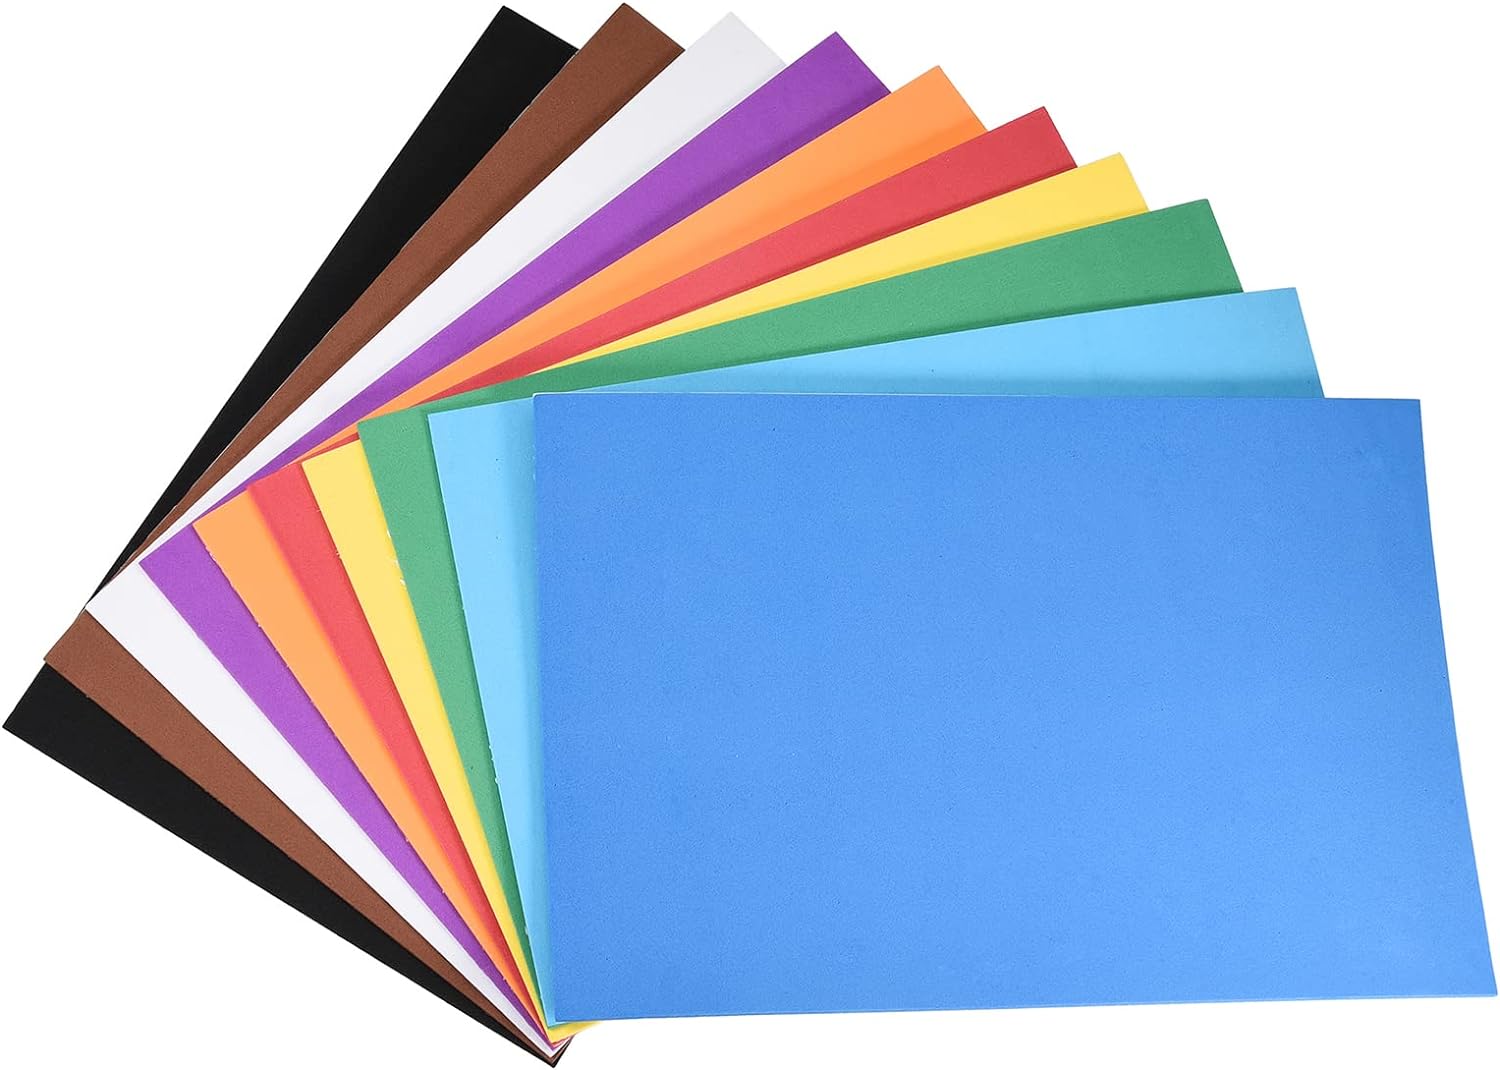 Colorful Eva Foam Sheets Self Adhesive 7.8 x 11.8 Inch 1.8mm Thickness For Crafts DIY 1 Set By PAIDU